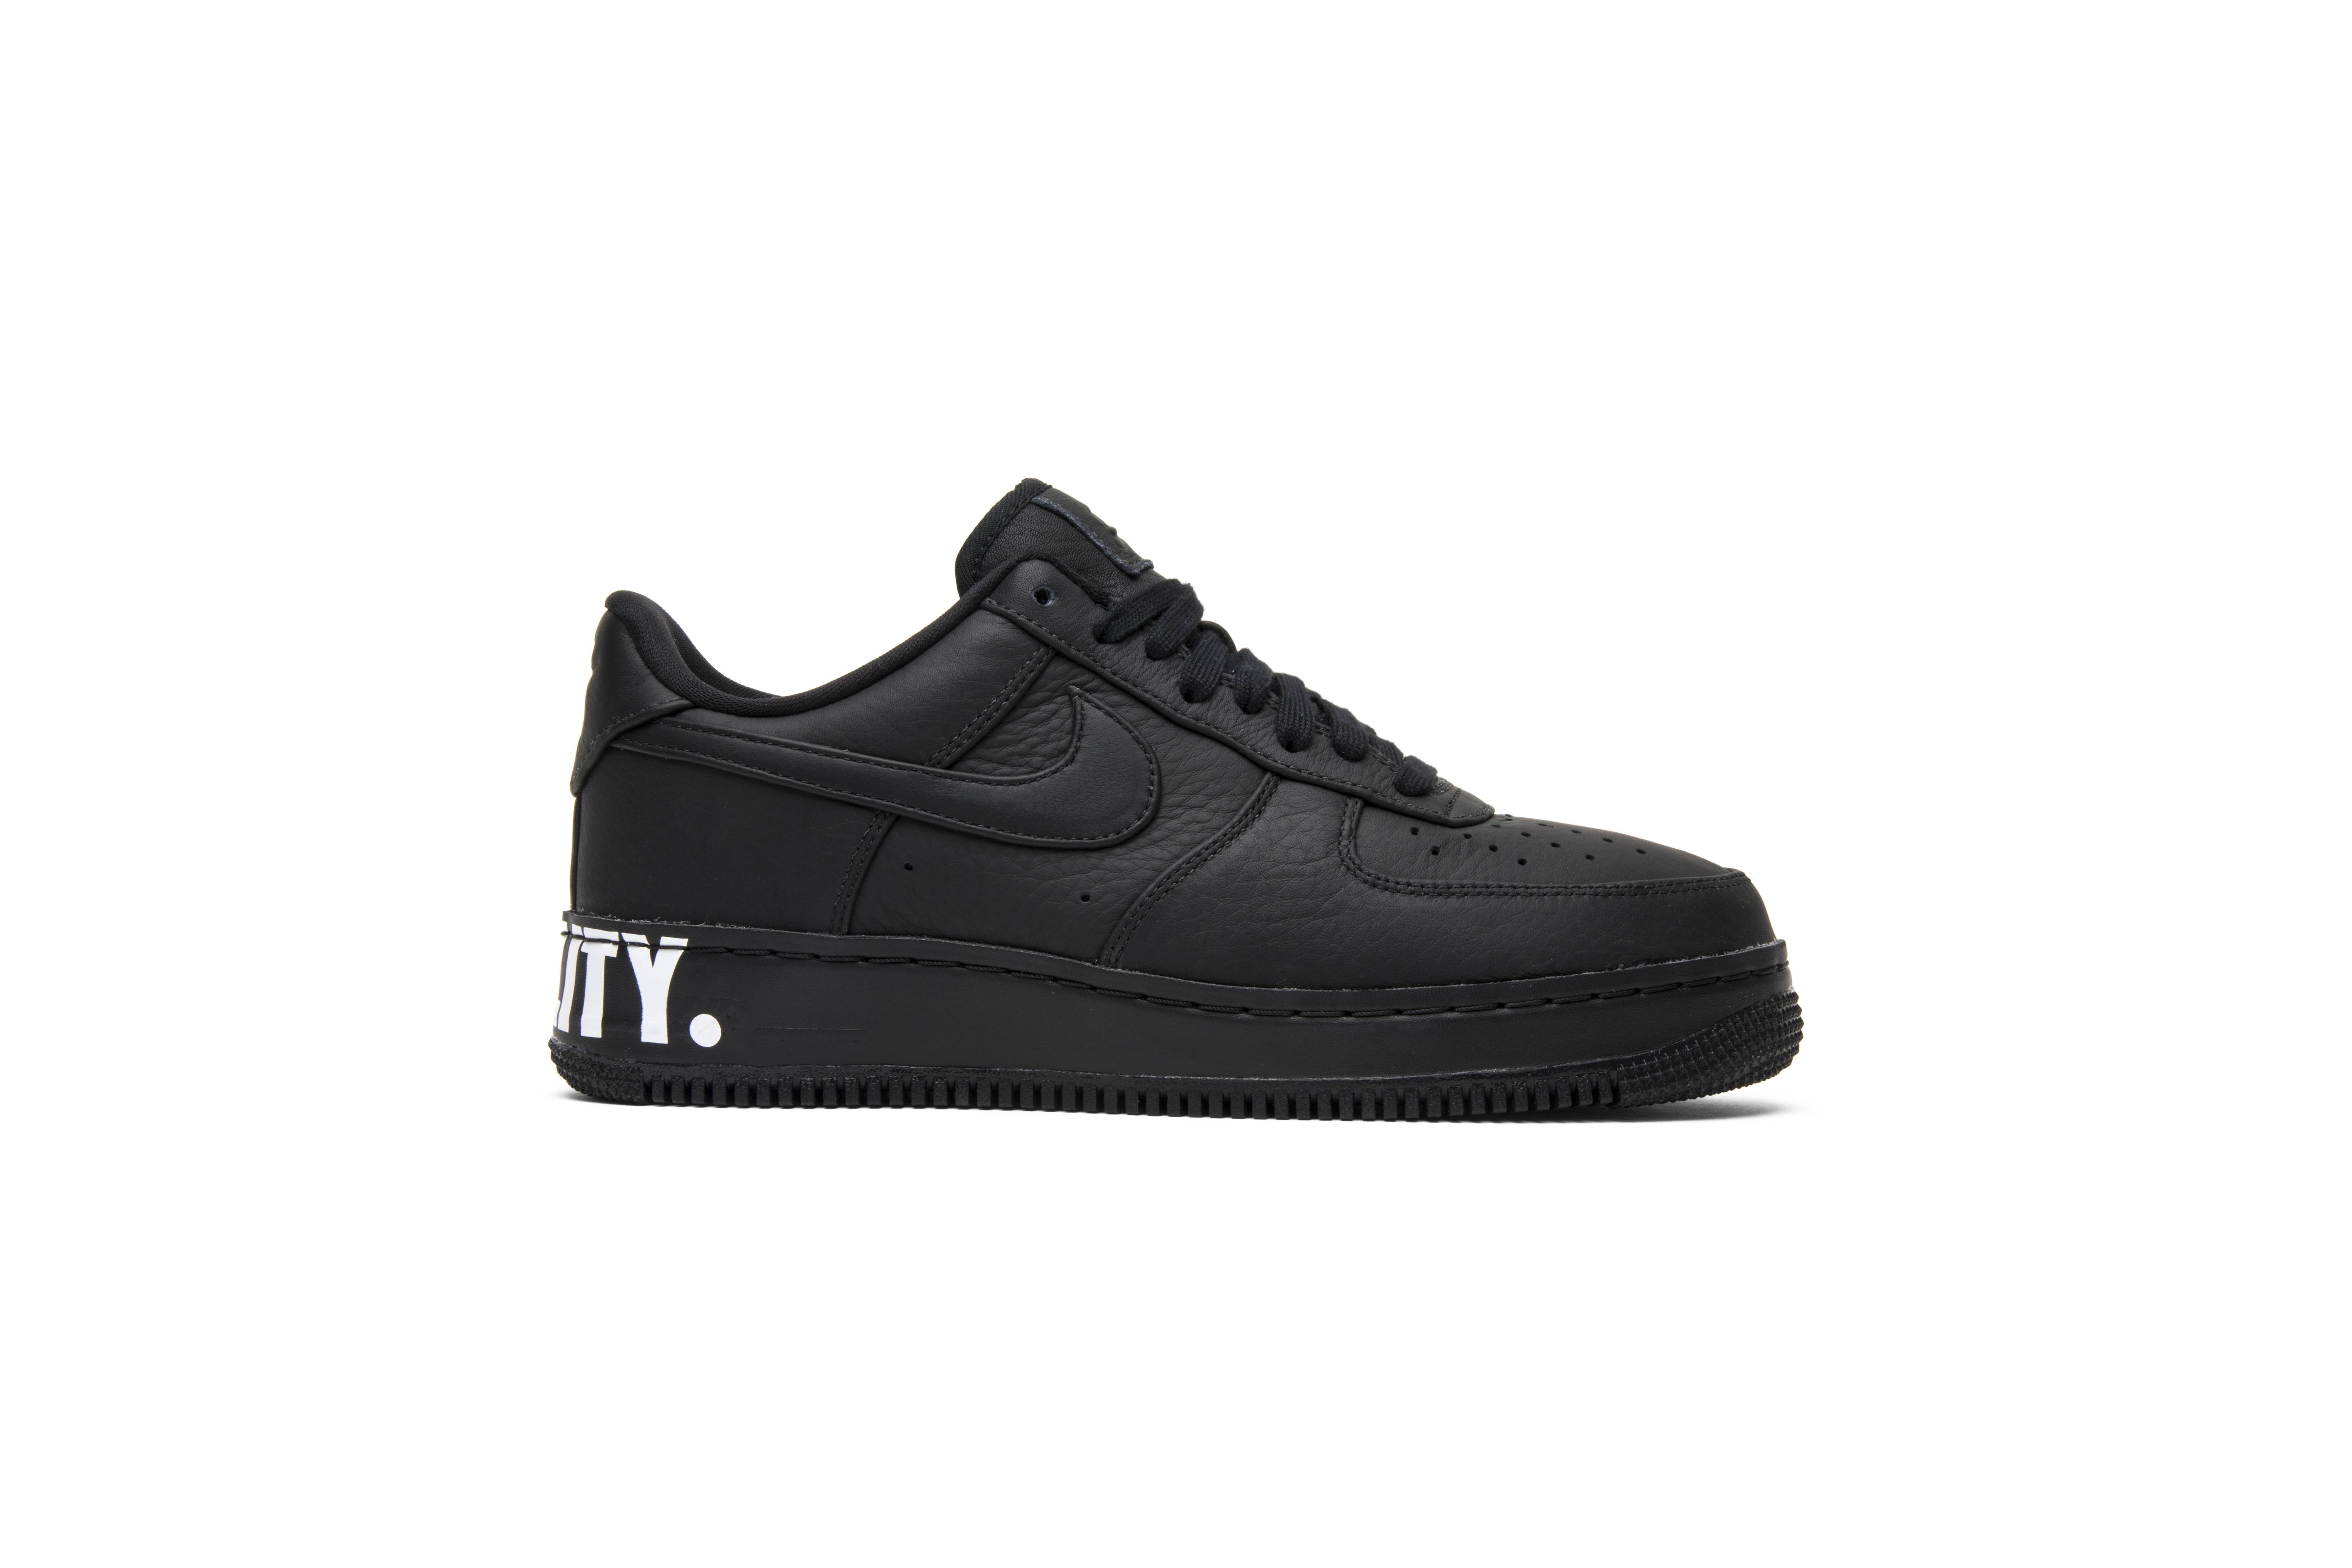 nike air force 1 low cmft equality